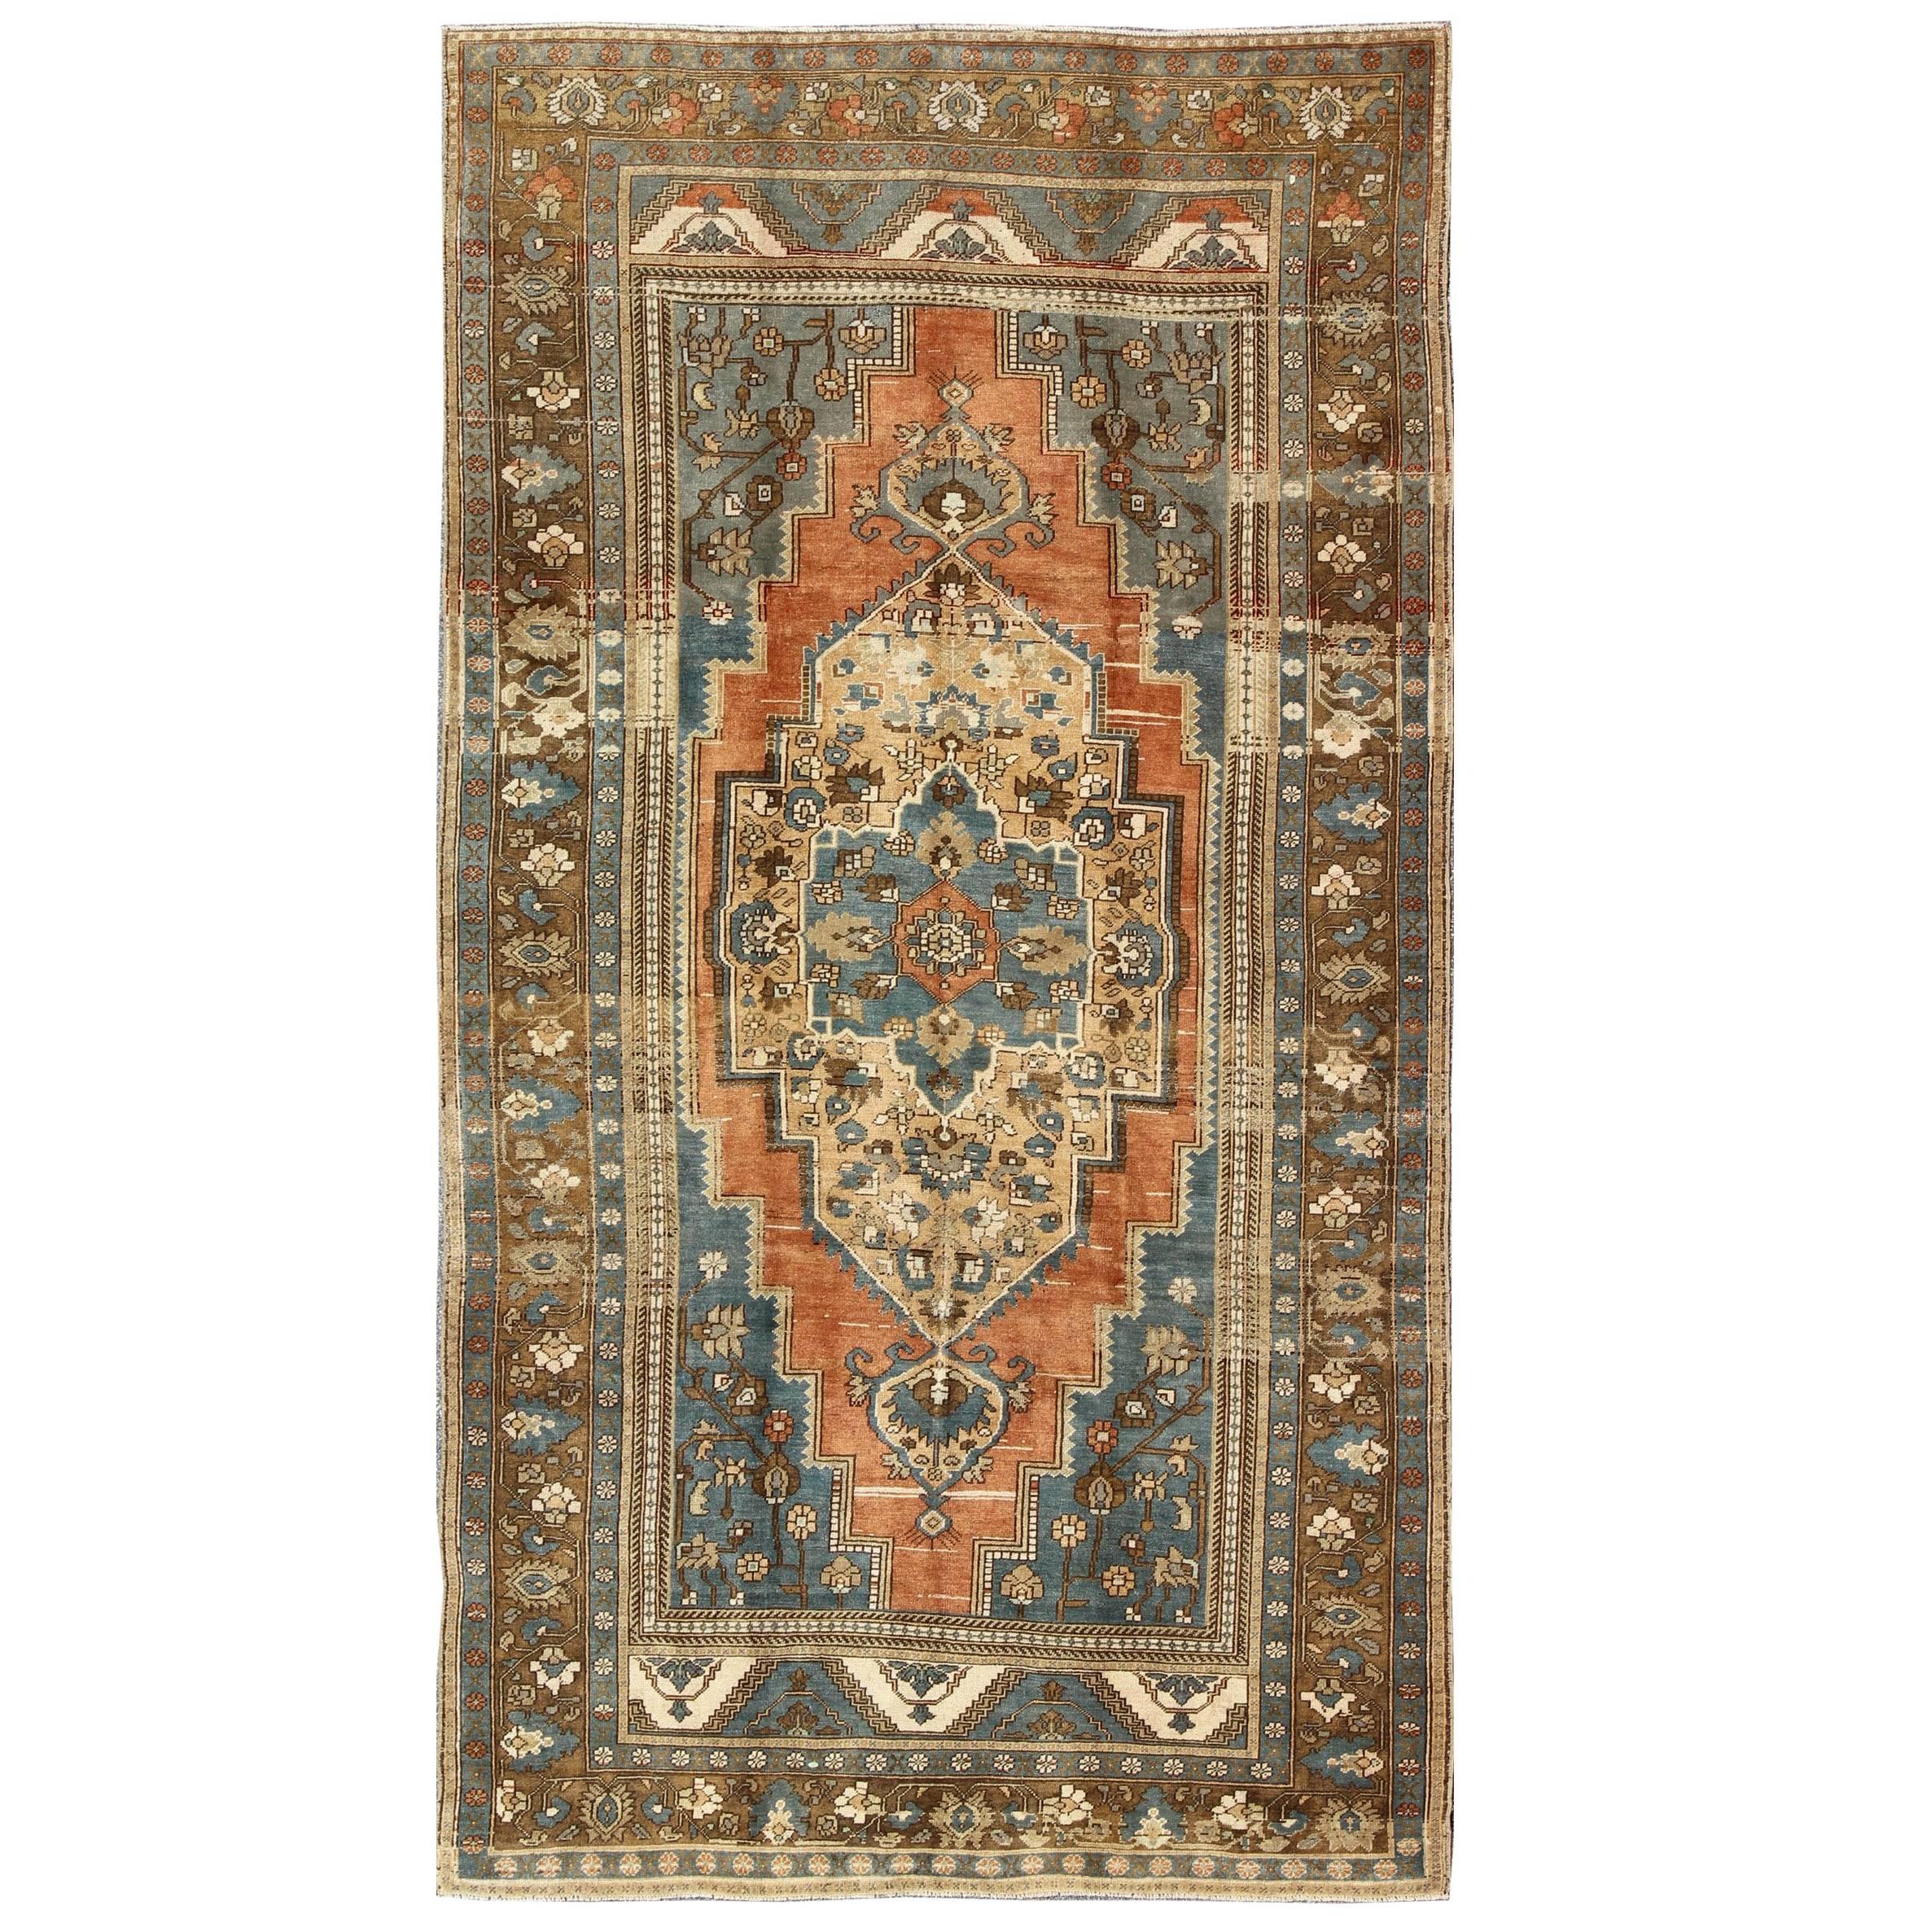 Antique Turkish Colorful Oushak Gallery Rug In Blue Brown & Terra-cotta For Sale